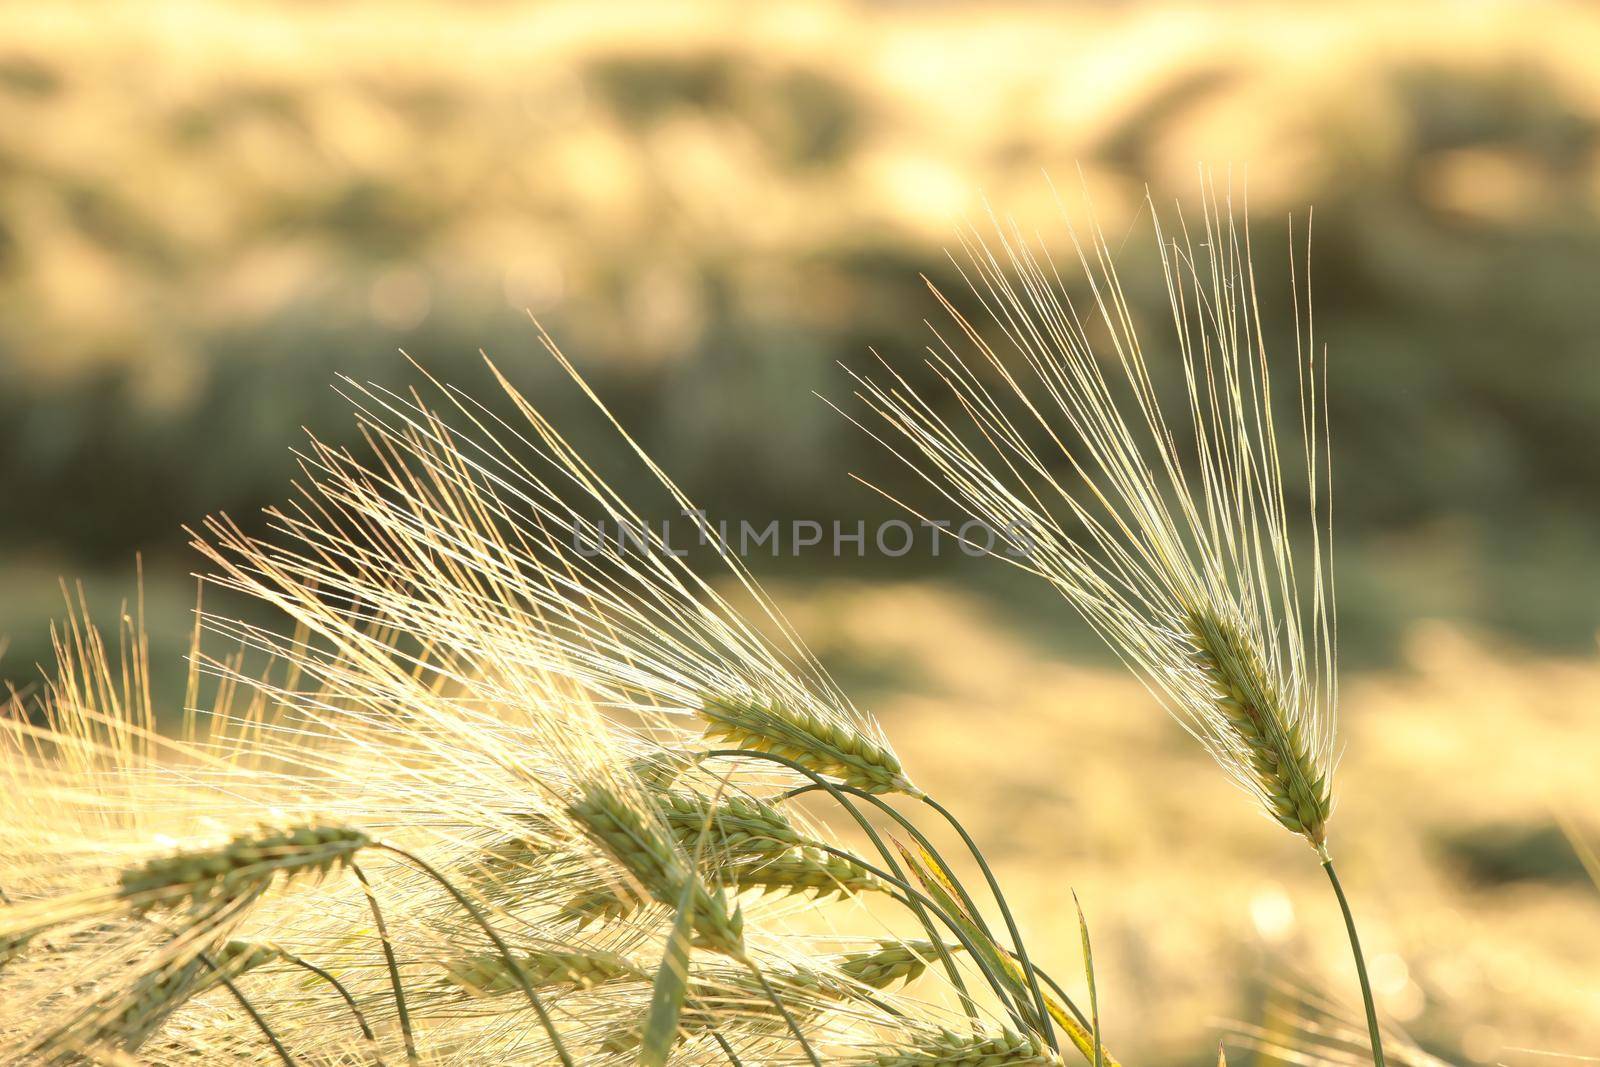 Ear of wheat in the field at dusk.